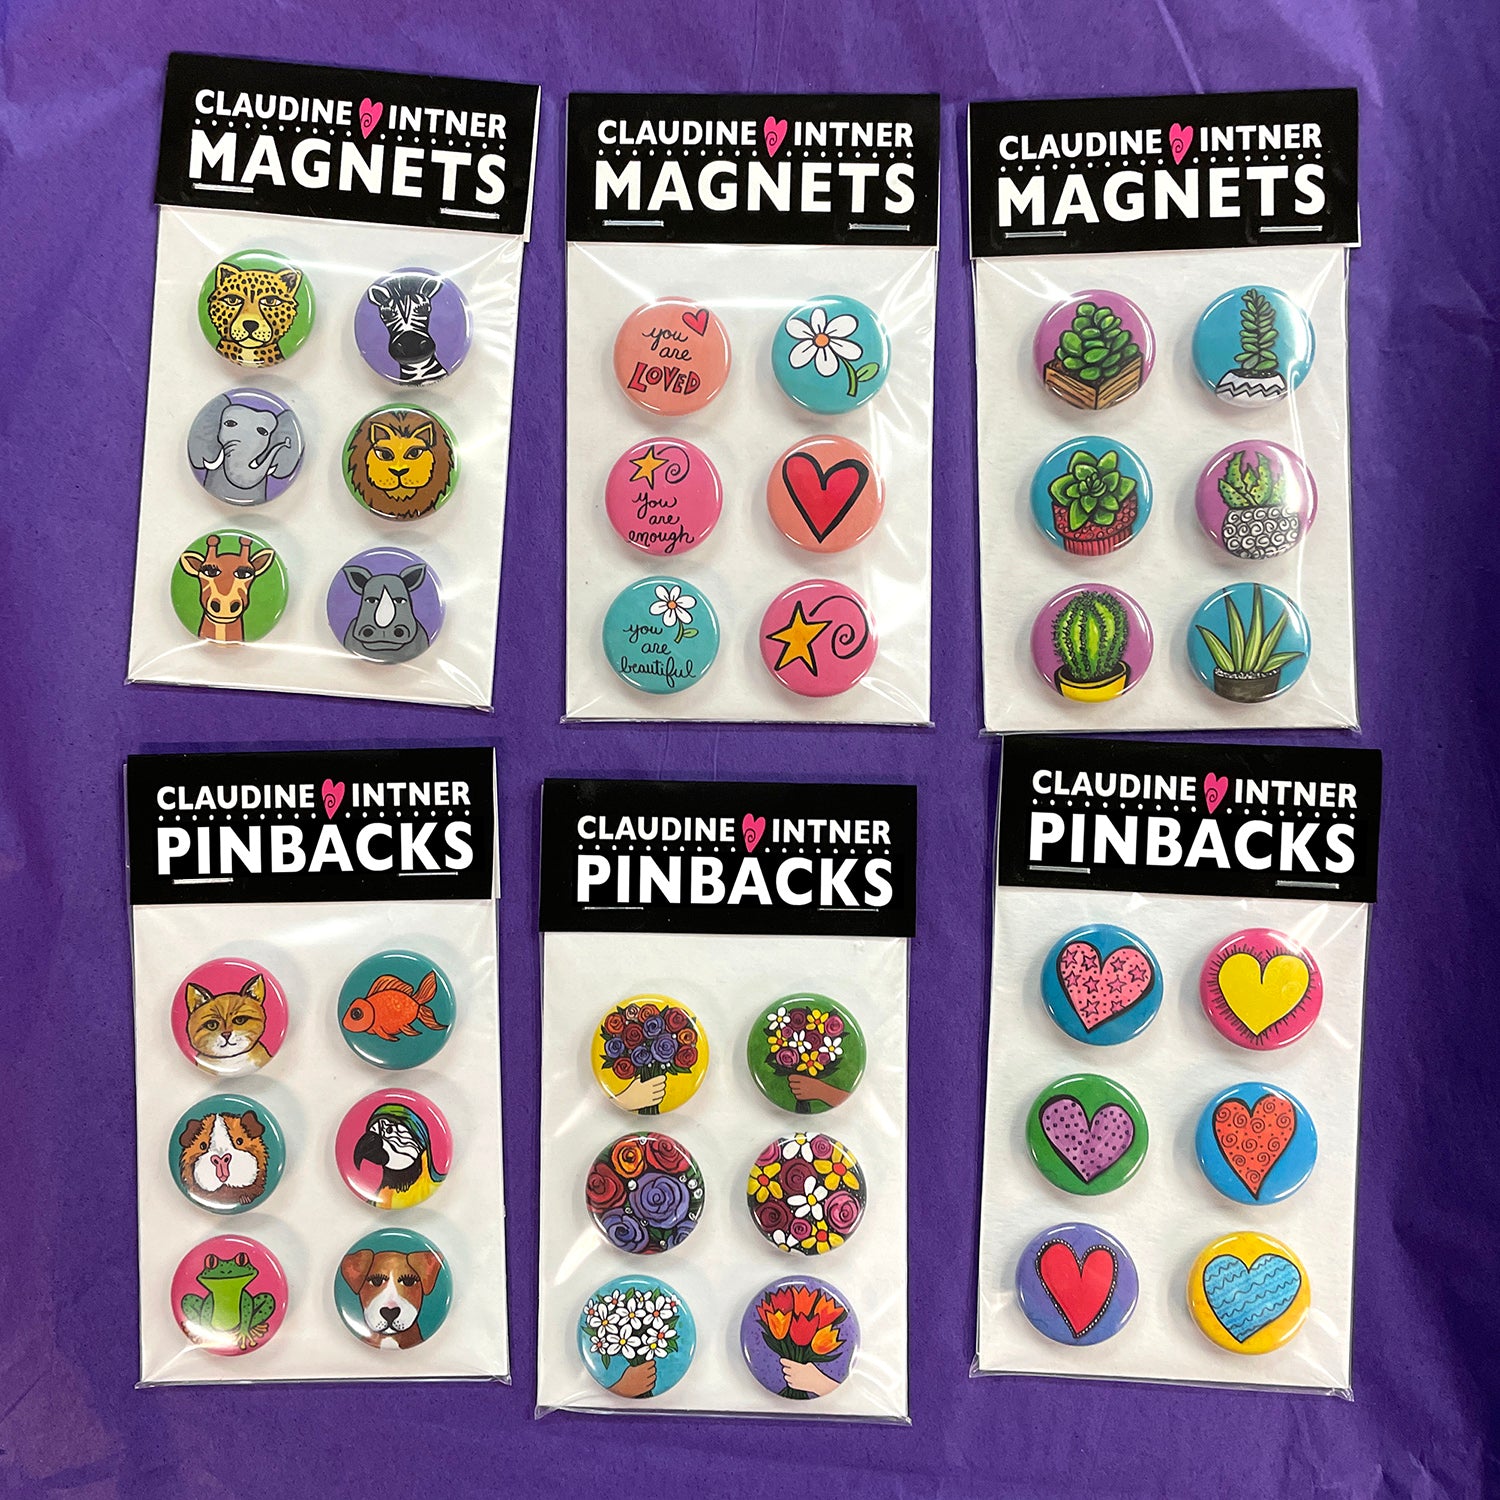 Wine Magnets or Wine Pinback Buttons